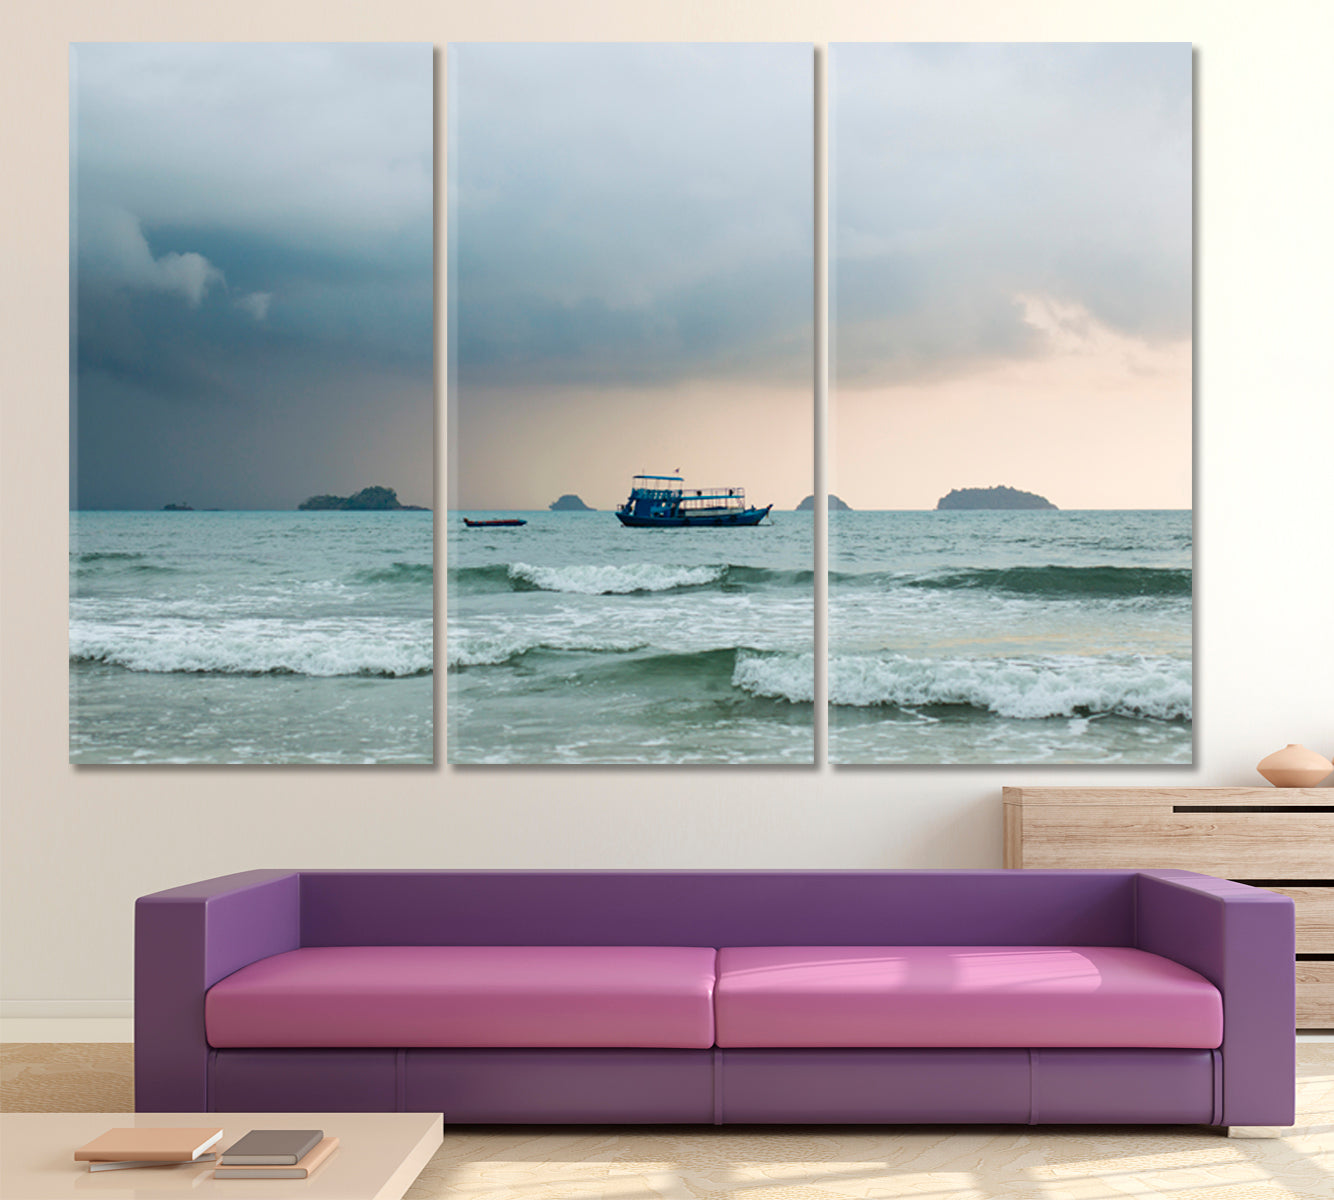 Weathered the Storm | Ship at Sea during a Storm Sailboat Ocean Waves Dark Sky Stormy Seas Skyscape Canvas Artesty 3 panels 36" x 24" 